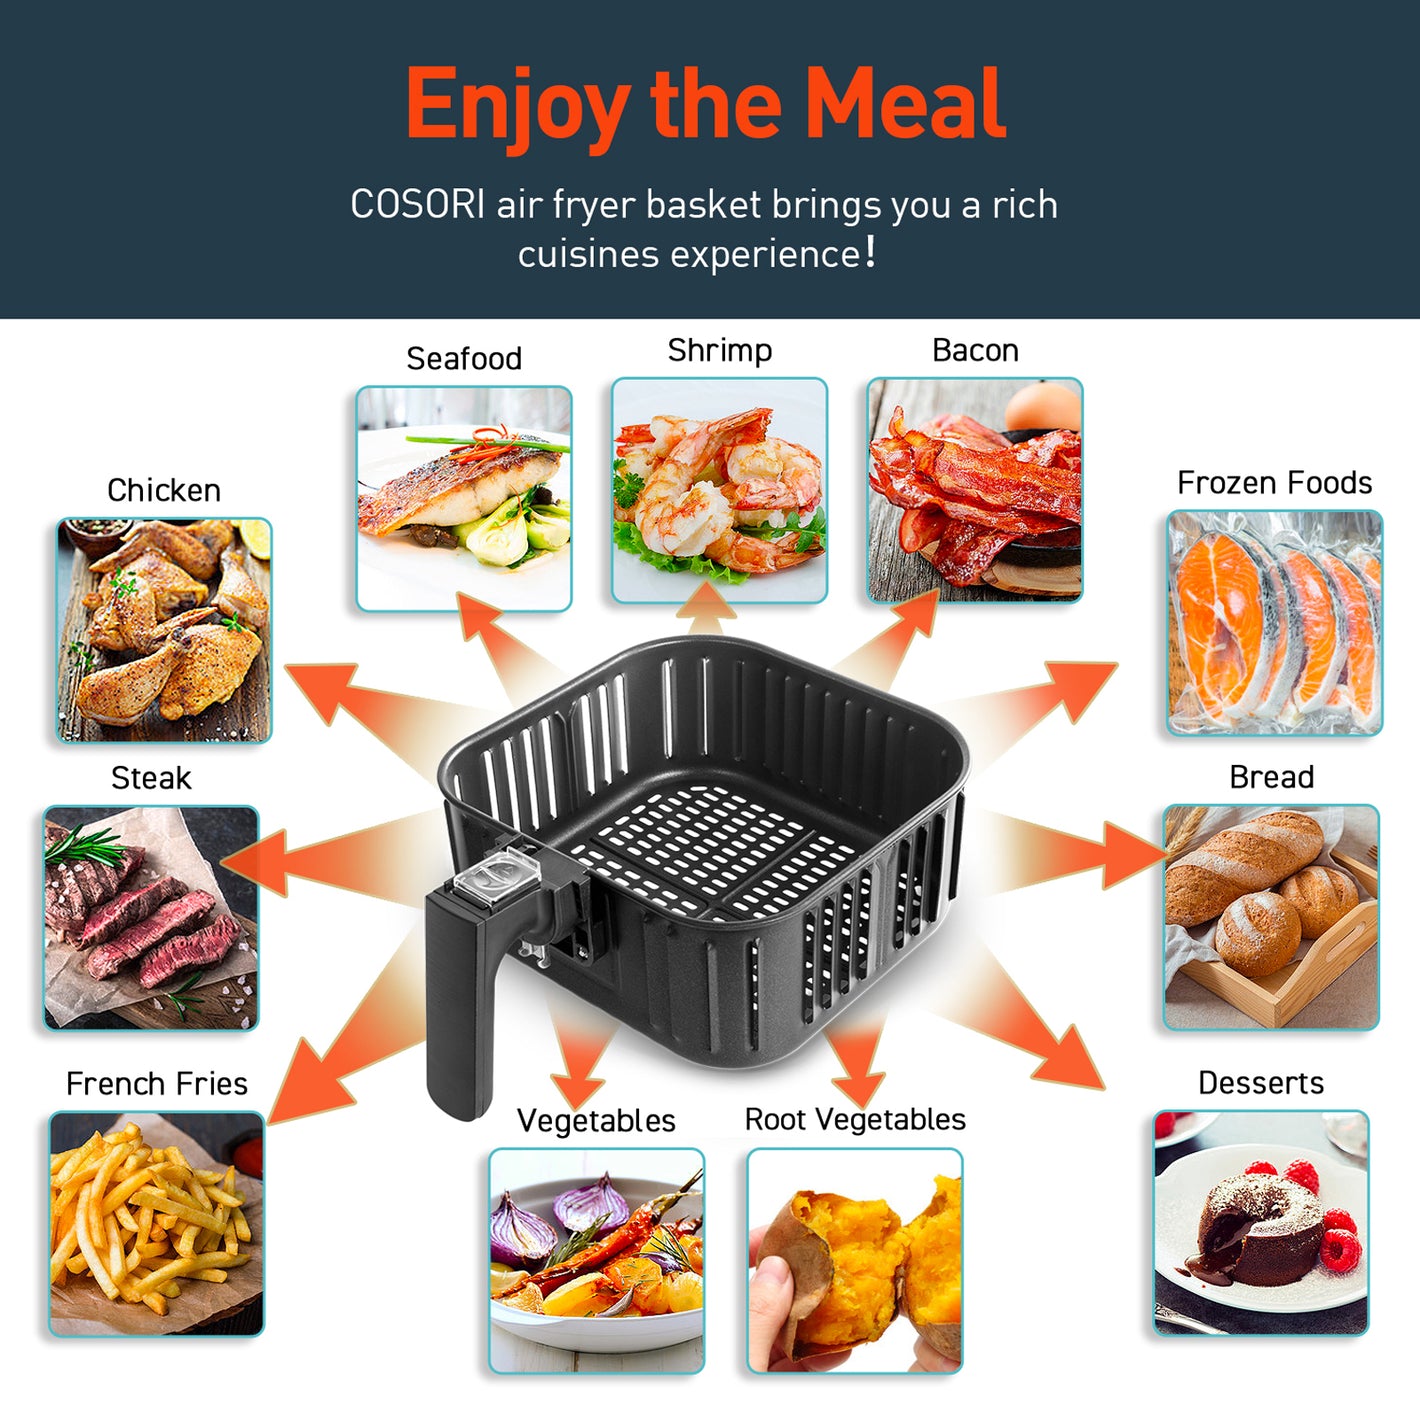 Enjoy the Meal COSORI air fryer basket brings you a rich cuisines experience!